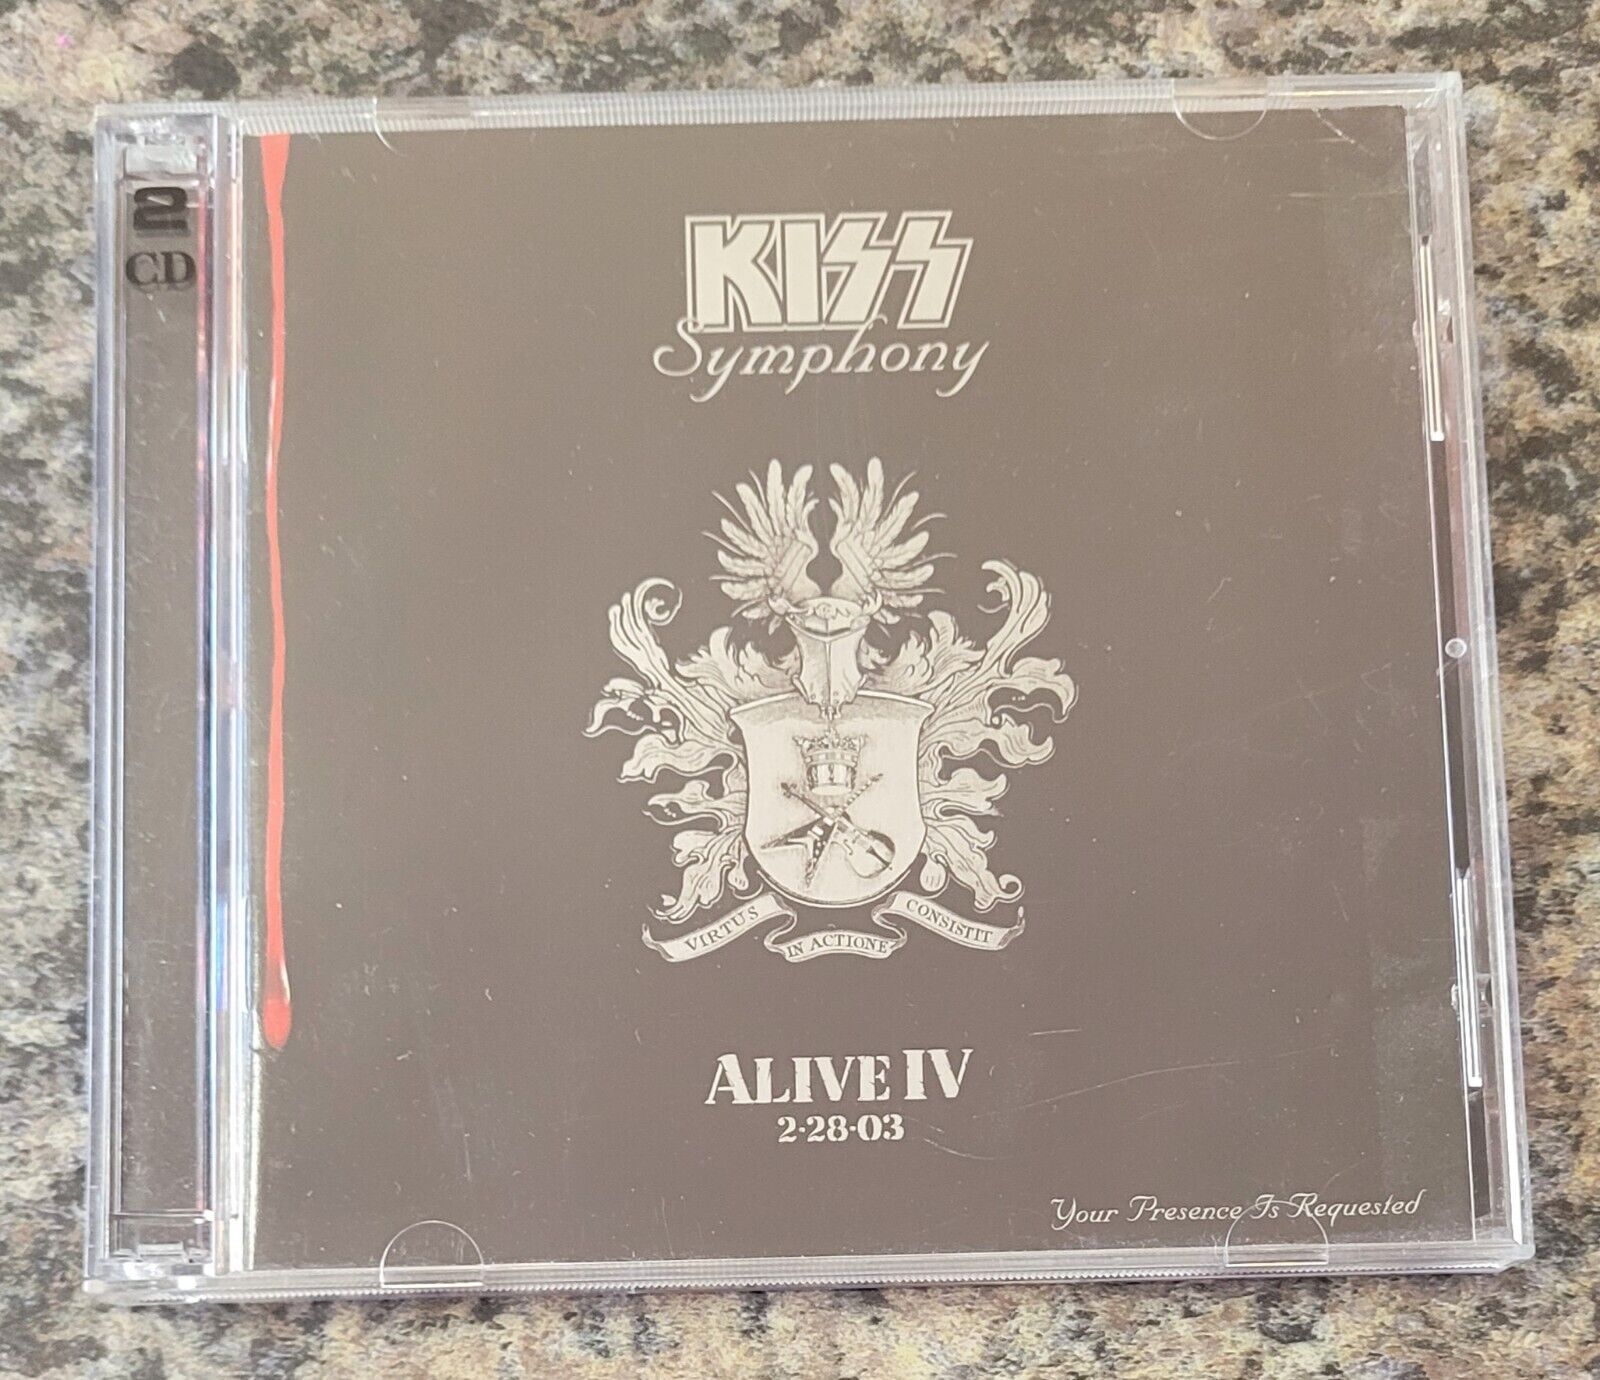 Kiss Symphony Alive IV 2-28-03 Your Presence Is Requested (2 CD Set) Sanctuary